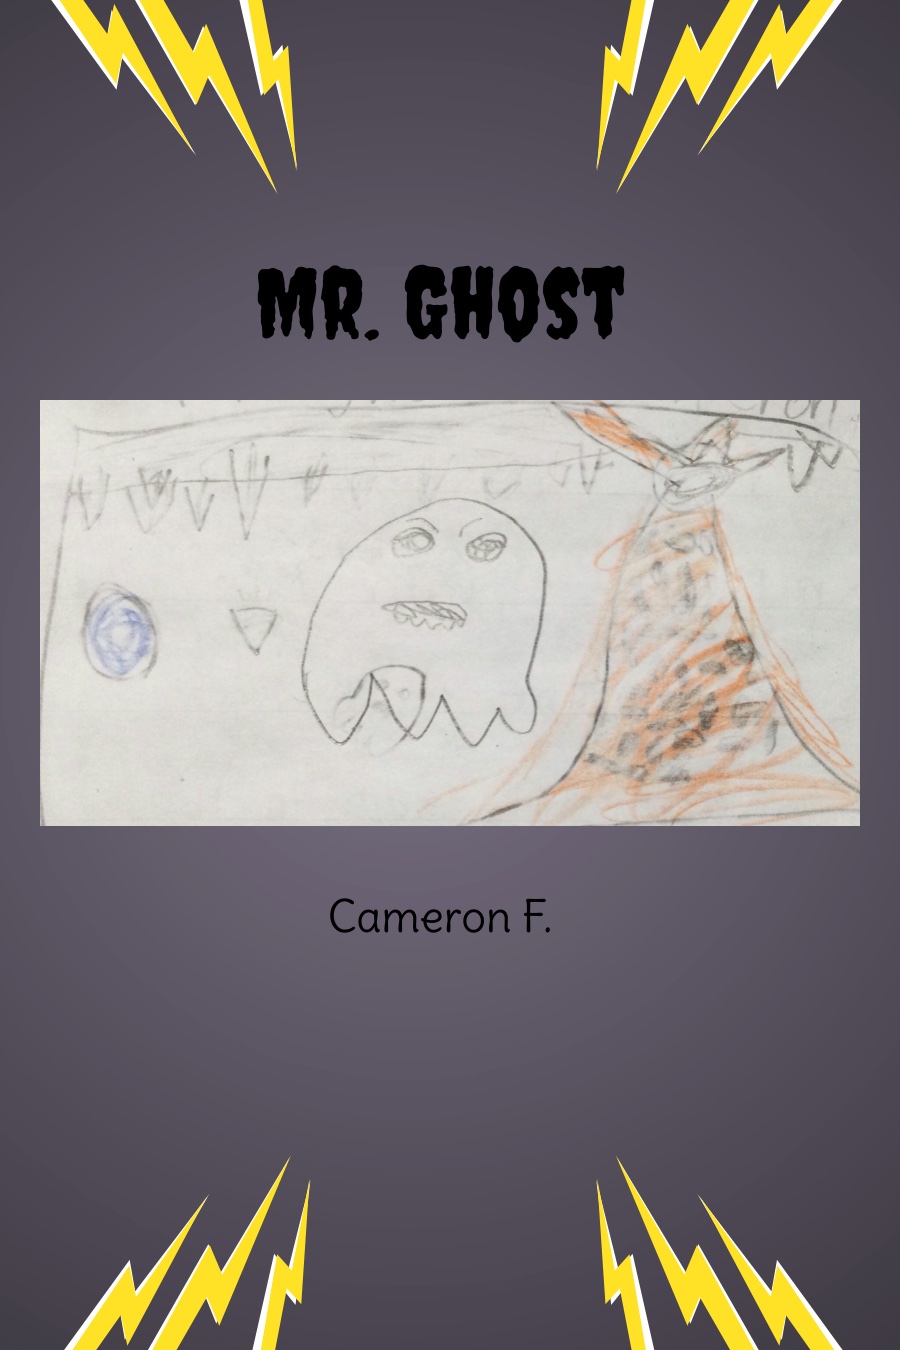 Mr. Ghost by Cameron F